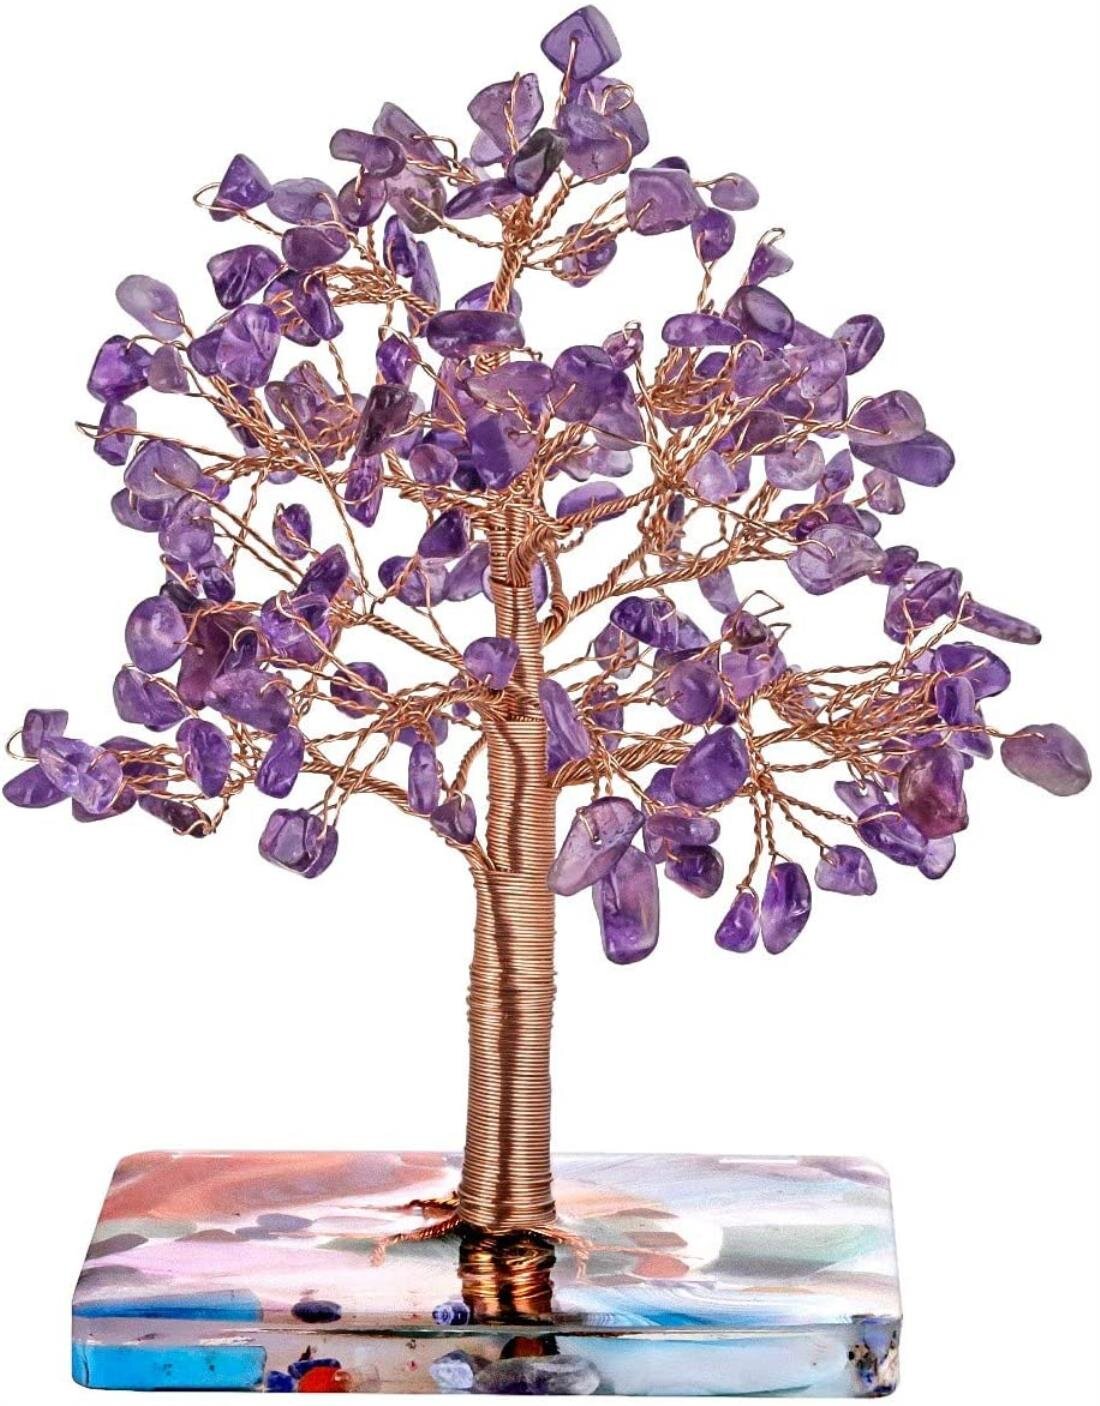 NATURAL AMETHYST GEMSTONE CHIP TREE WITH 100 STONES CRYSTAL TREE OF LIFE 